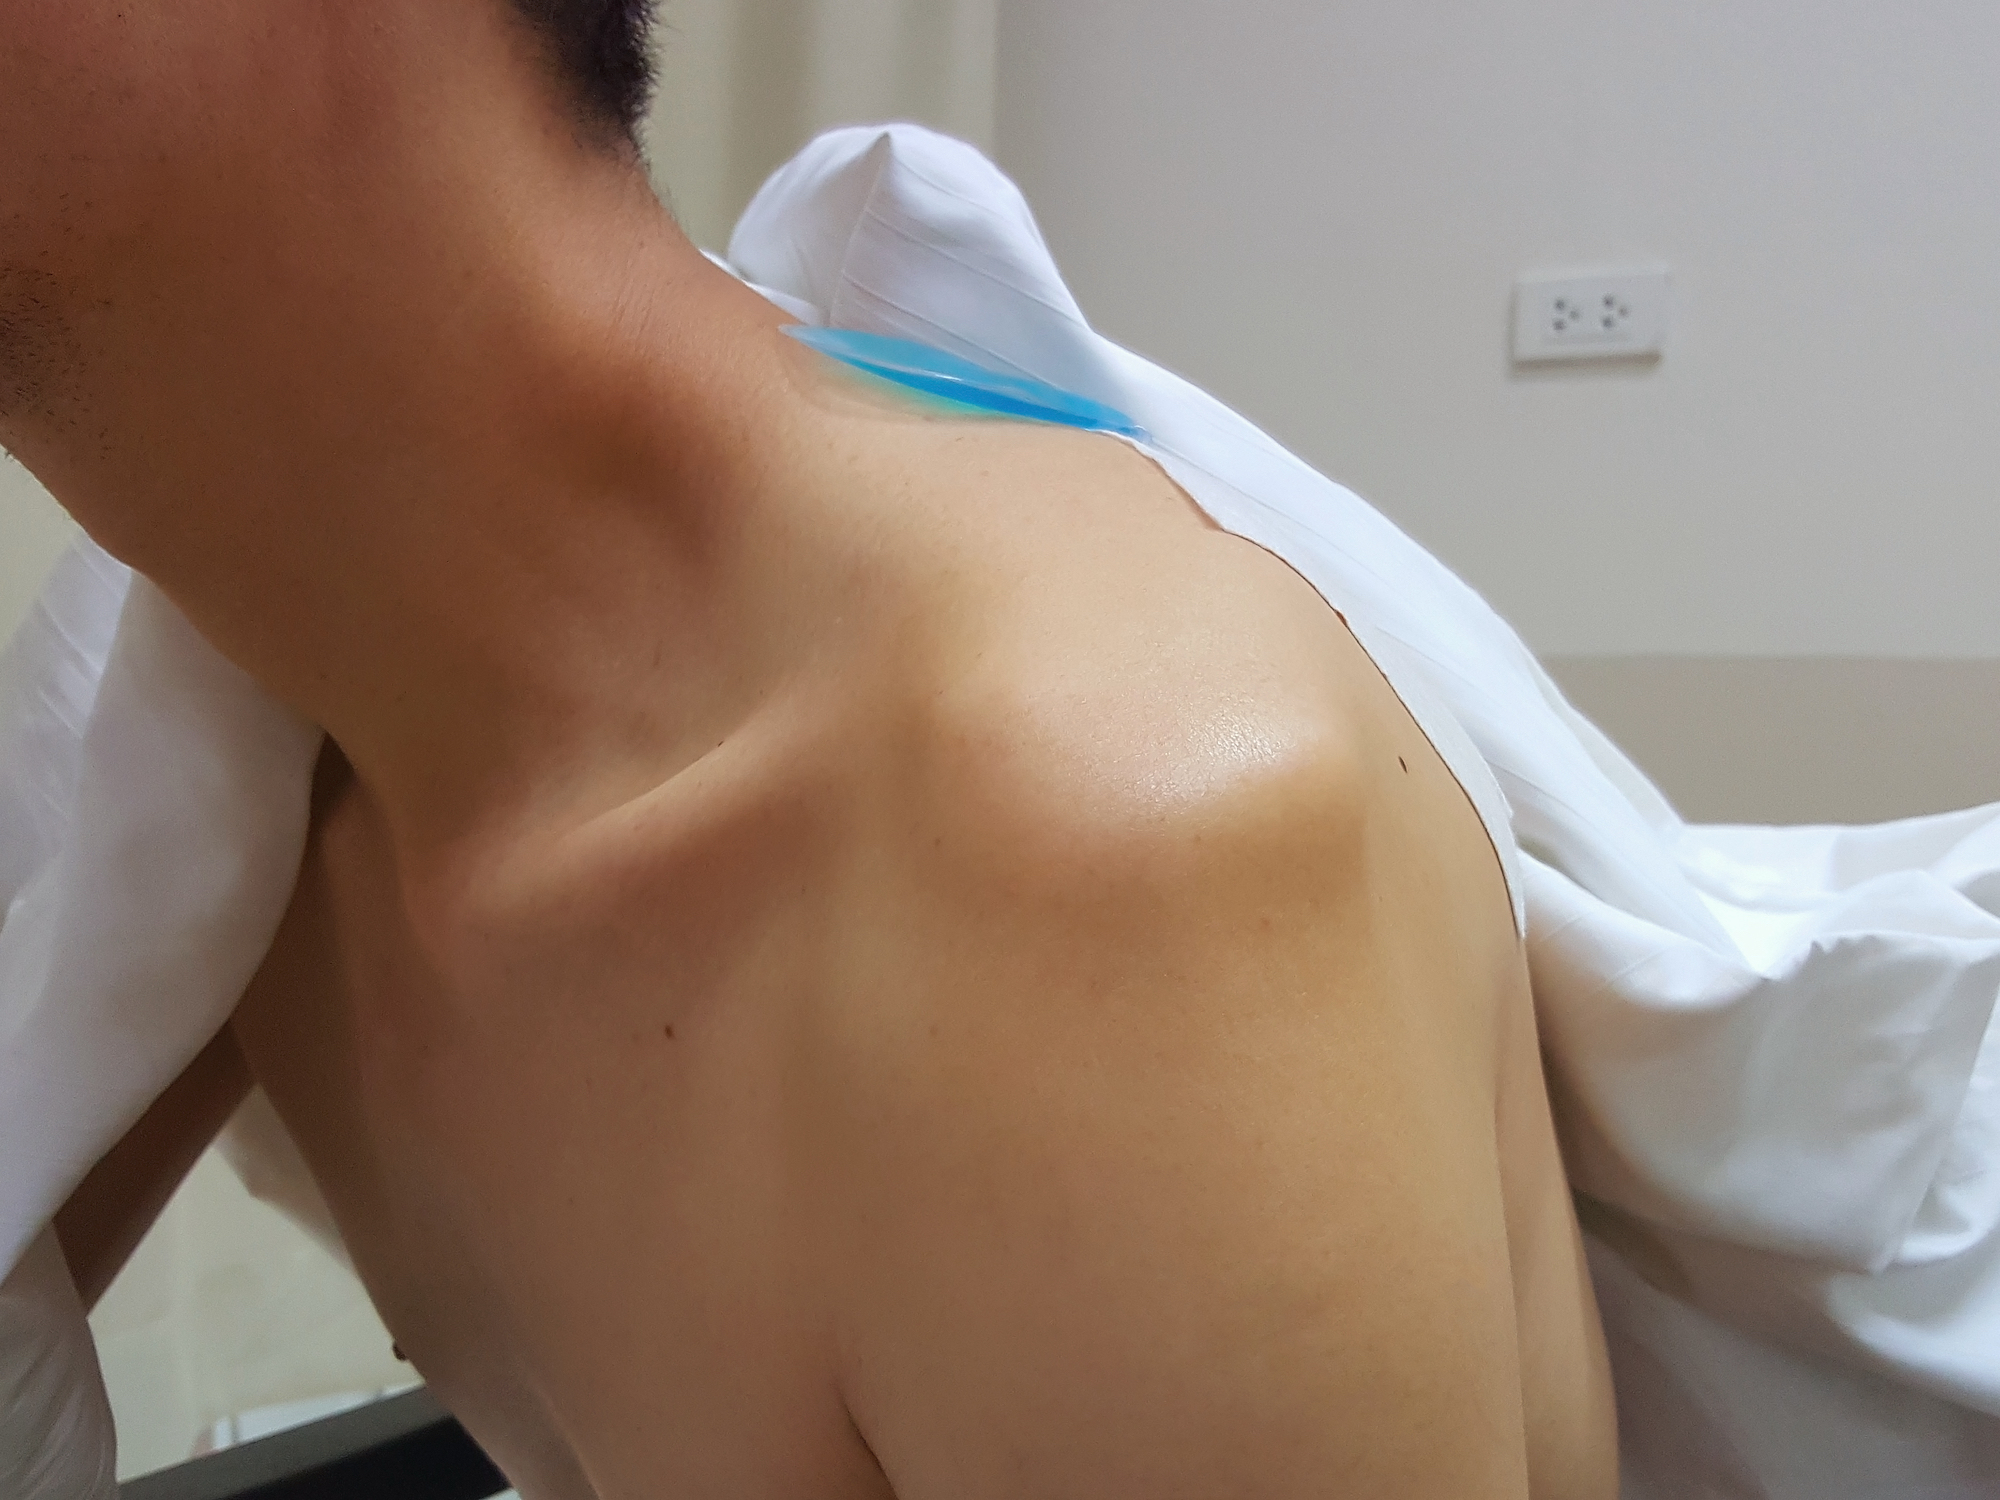 What is Shoulder Instability?